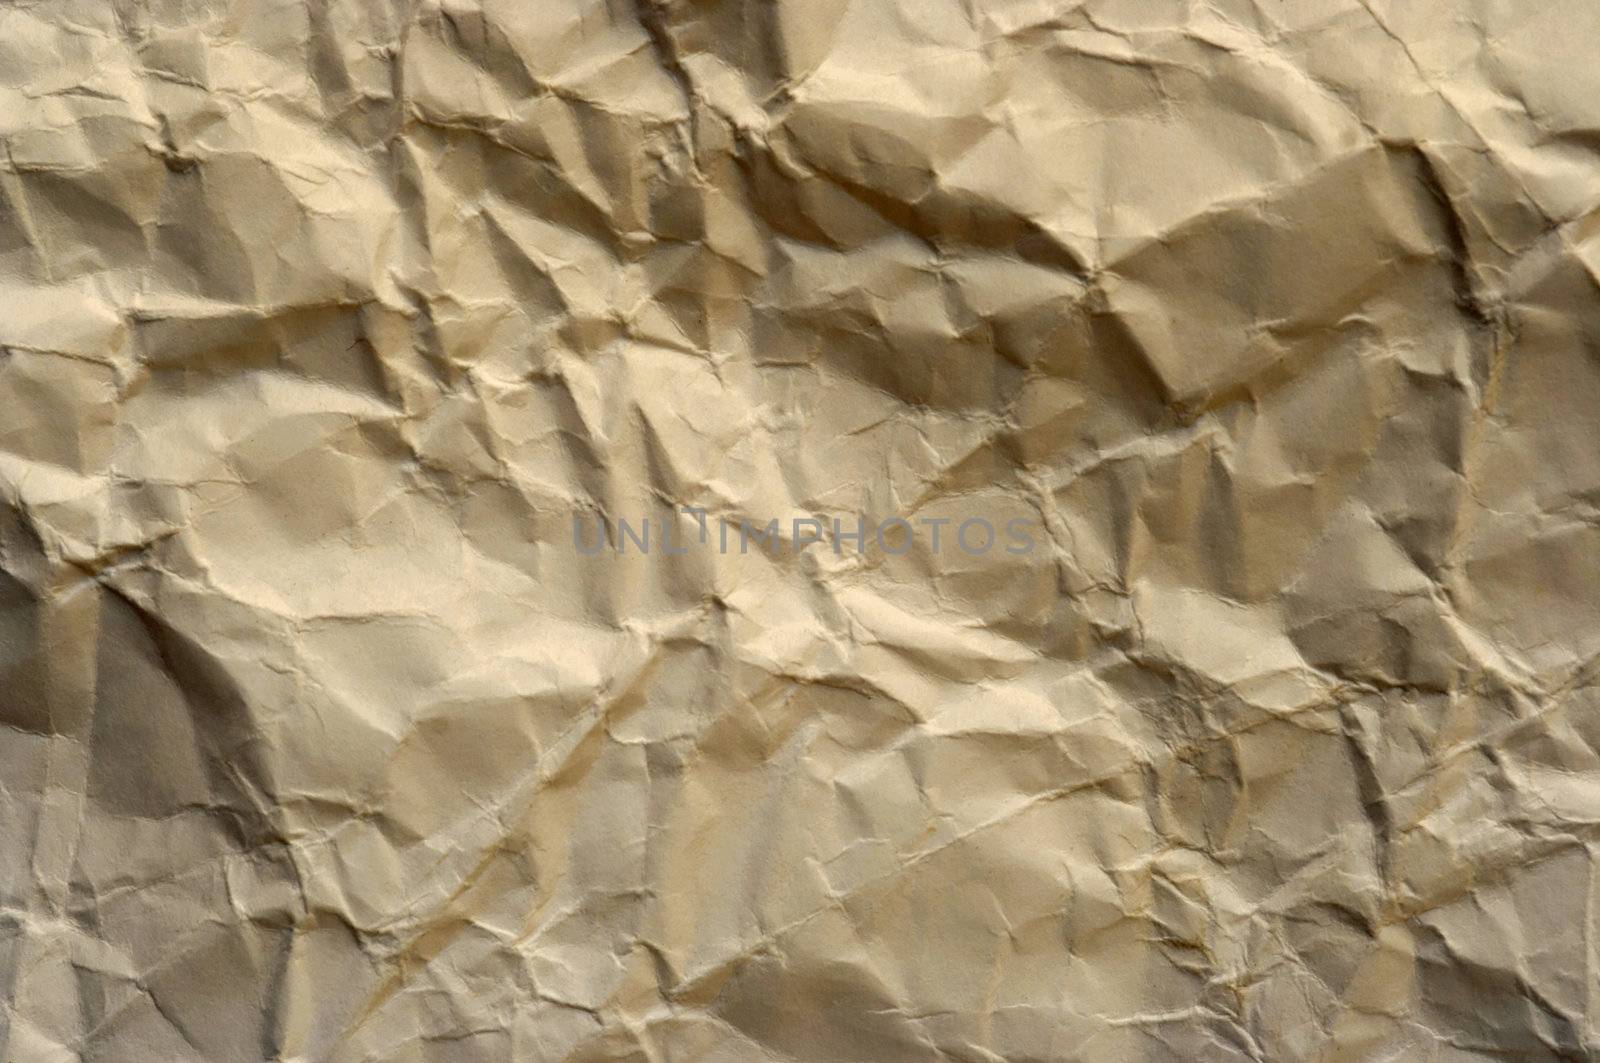 Detail of the crumpled paper